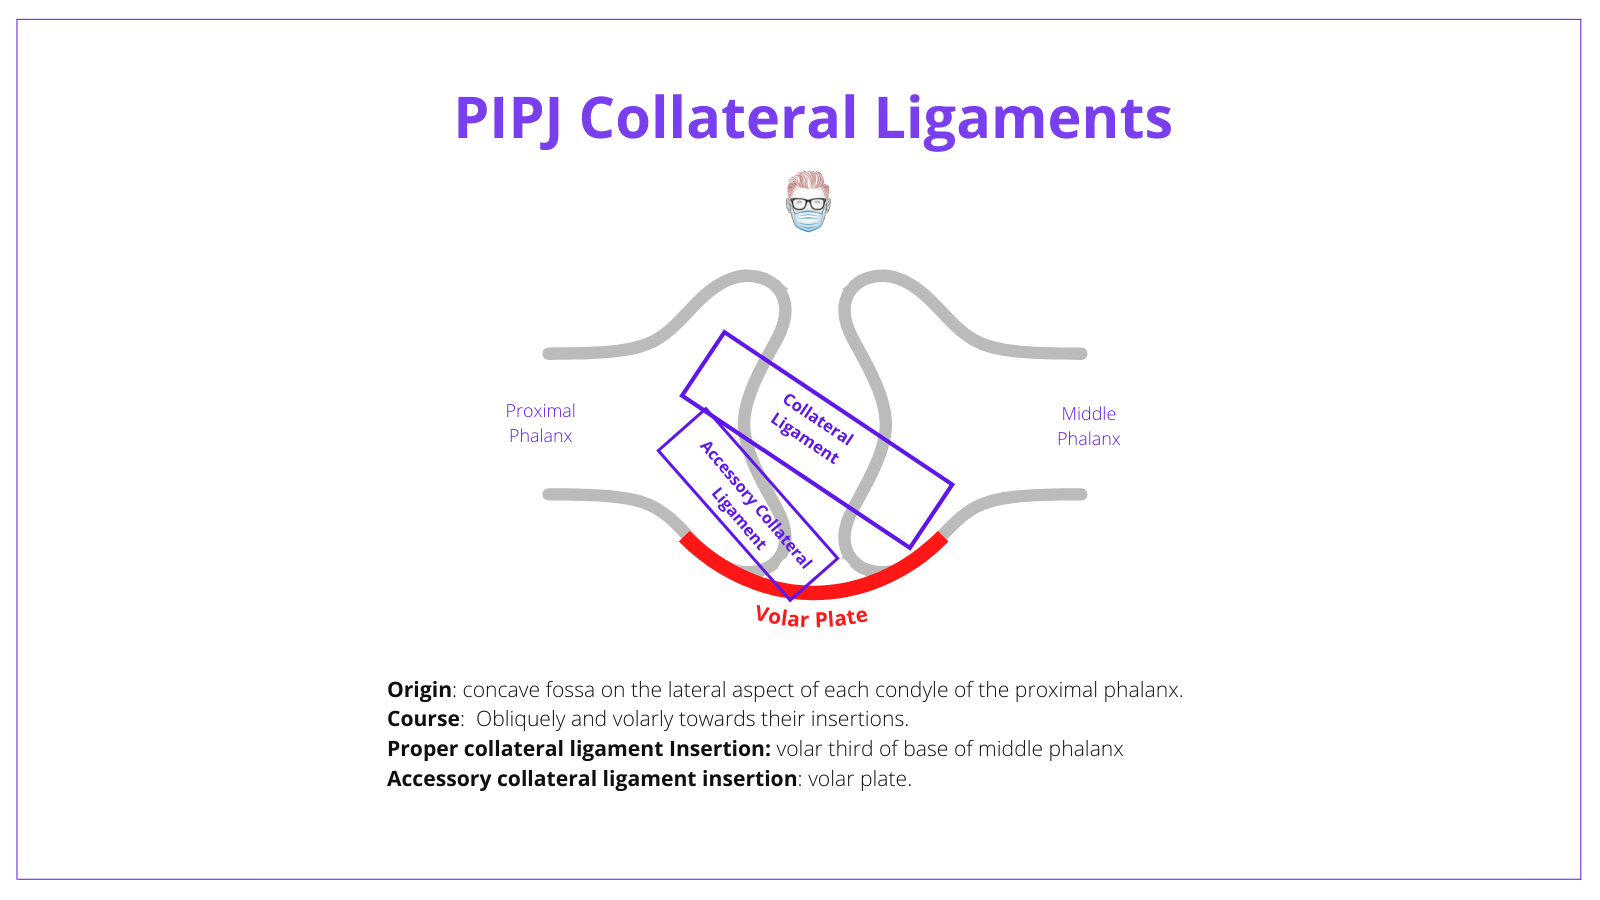 Anatomy, Proximal Interphalangeal Joint, PIPJ, Collateral Ligaments, Accessory Collateral Ligament, Proper Collateral Ligament